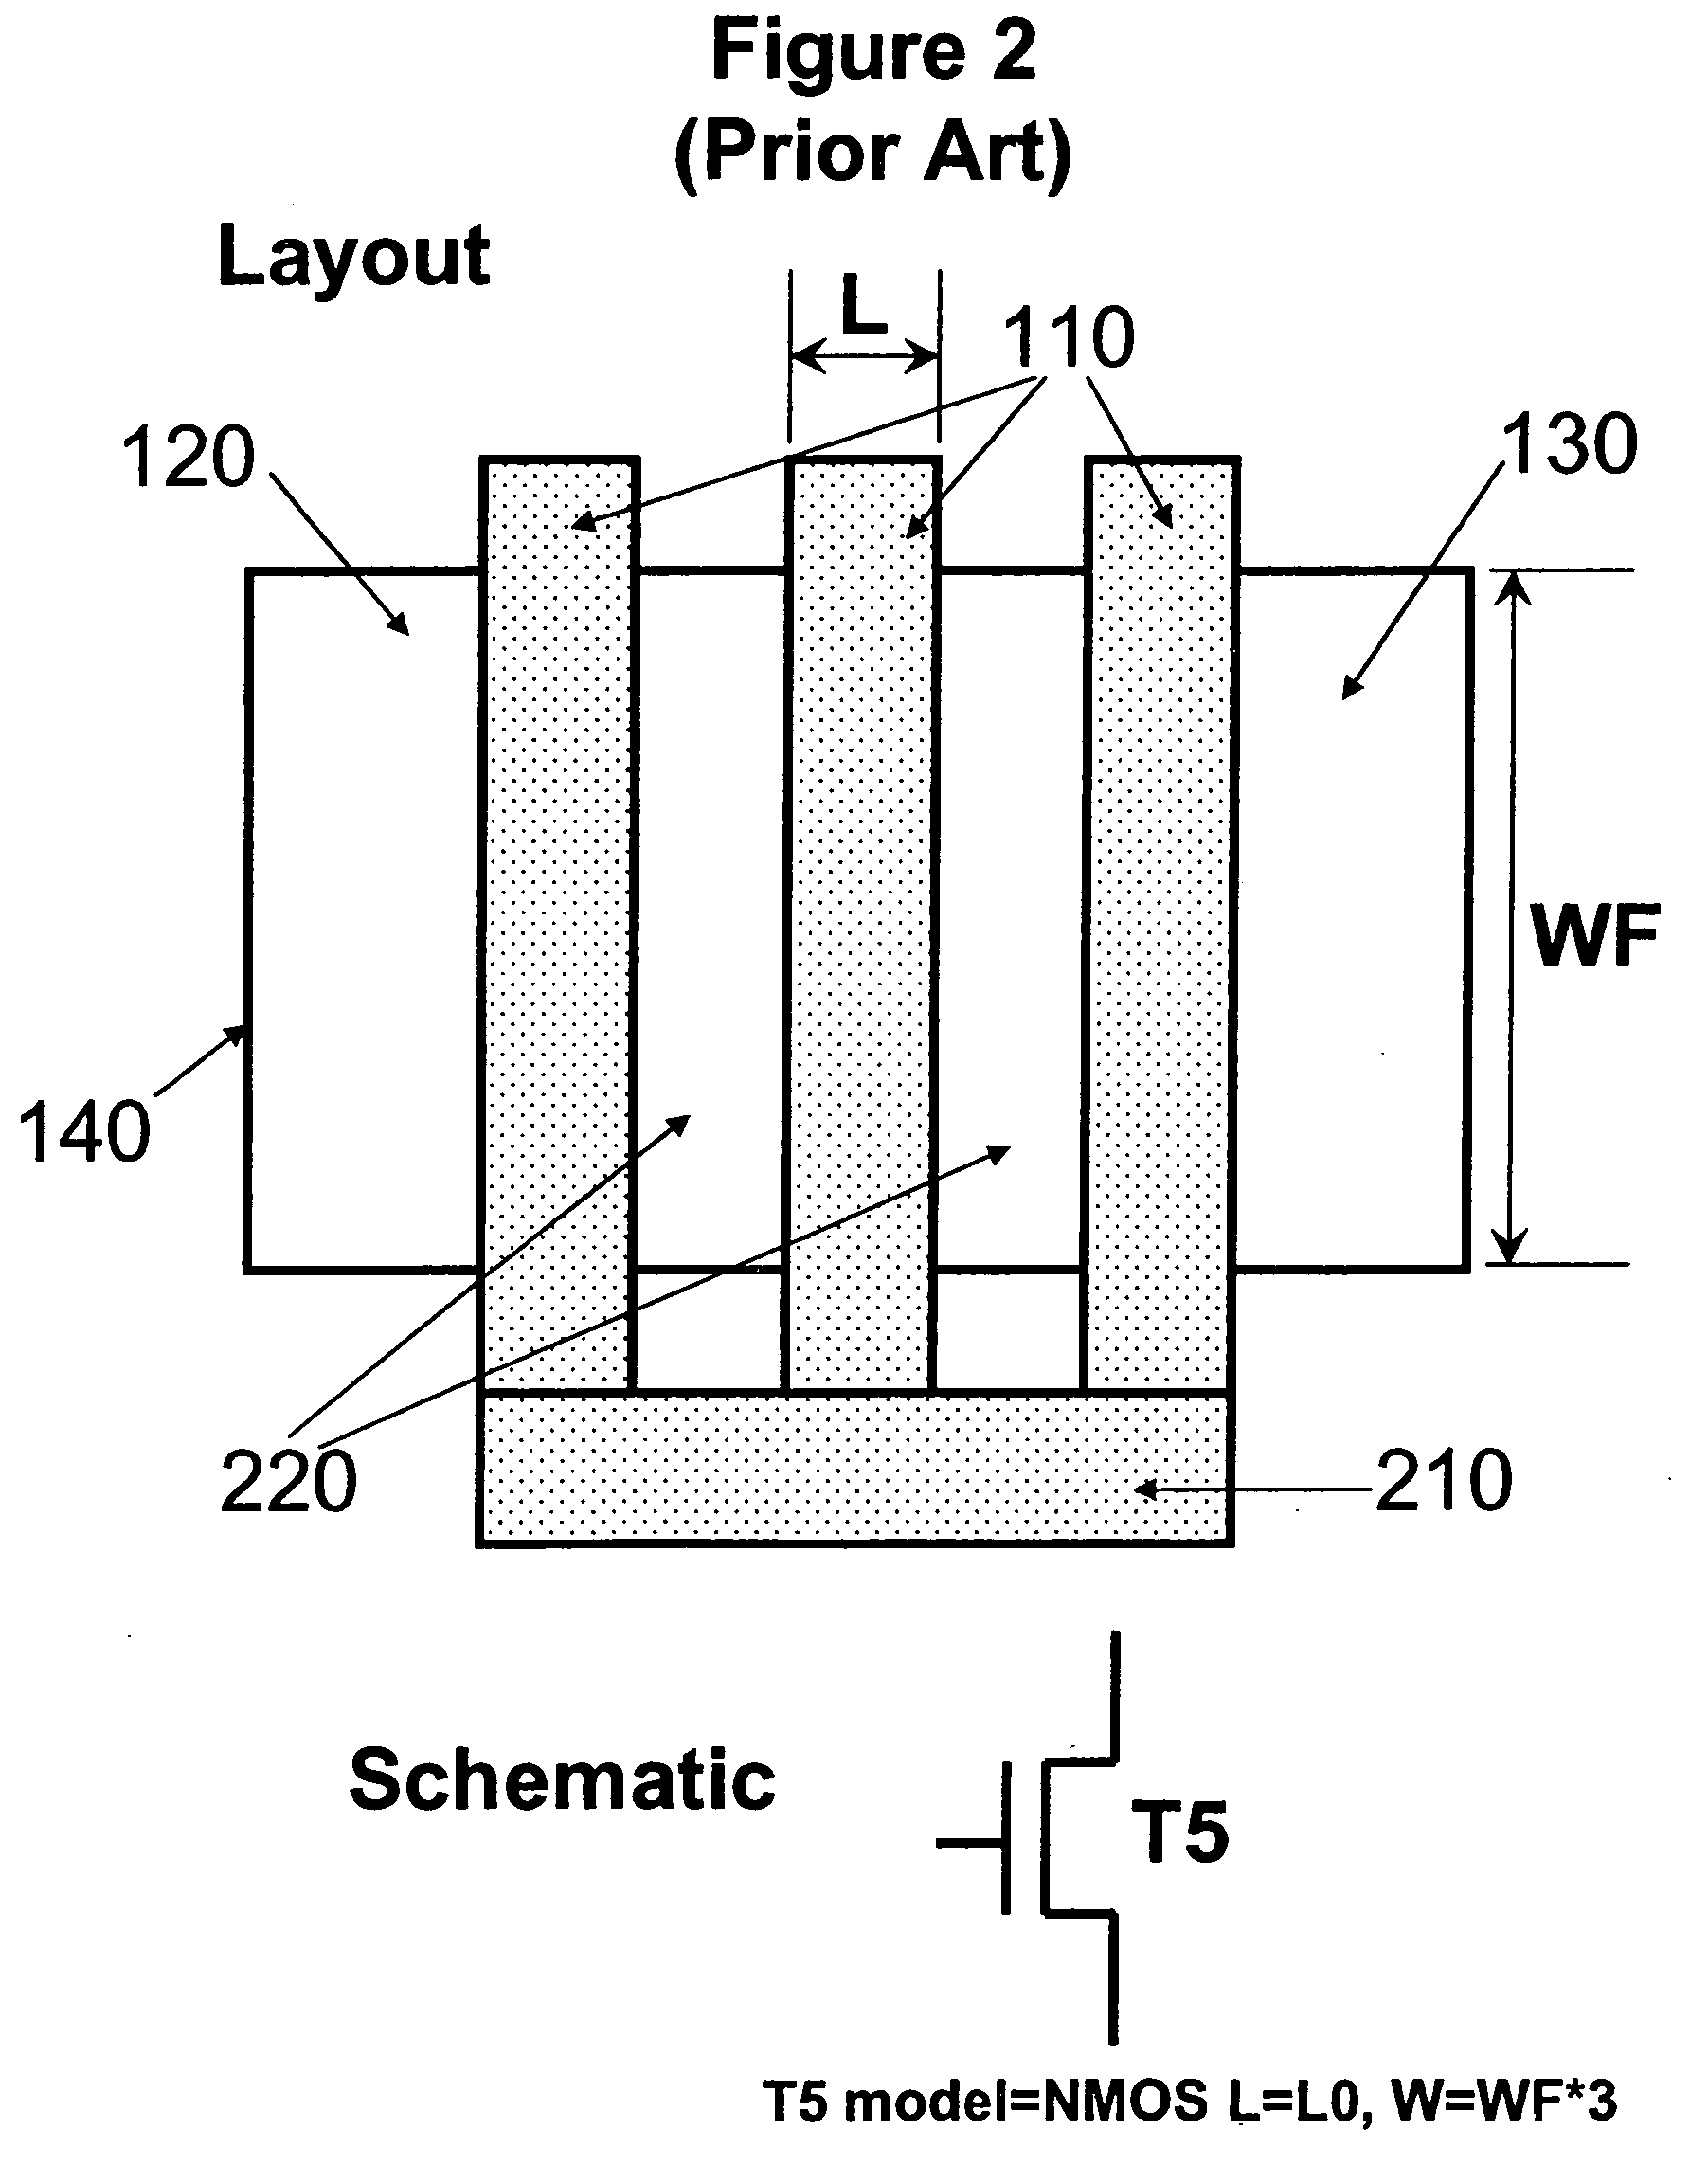 Method of checking the layout versus the schematic of multi-fingered MOS transistor layouts using a sub-circuit based extraction